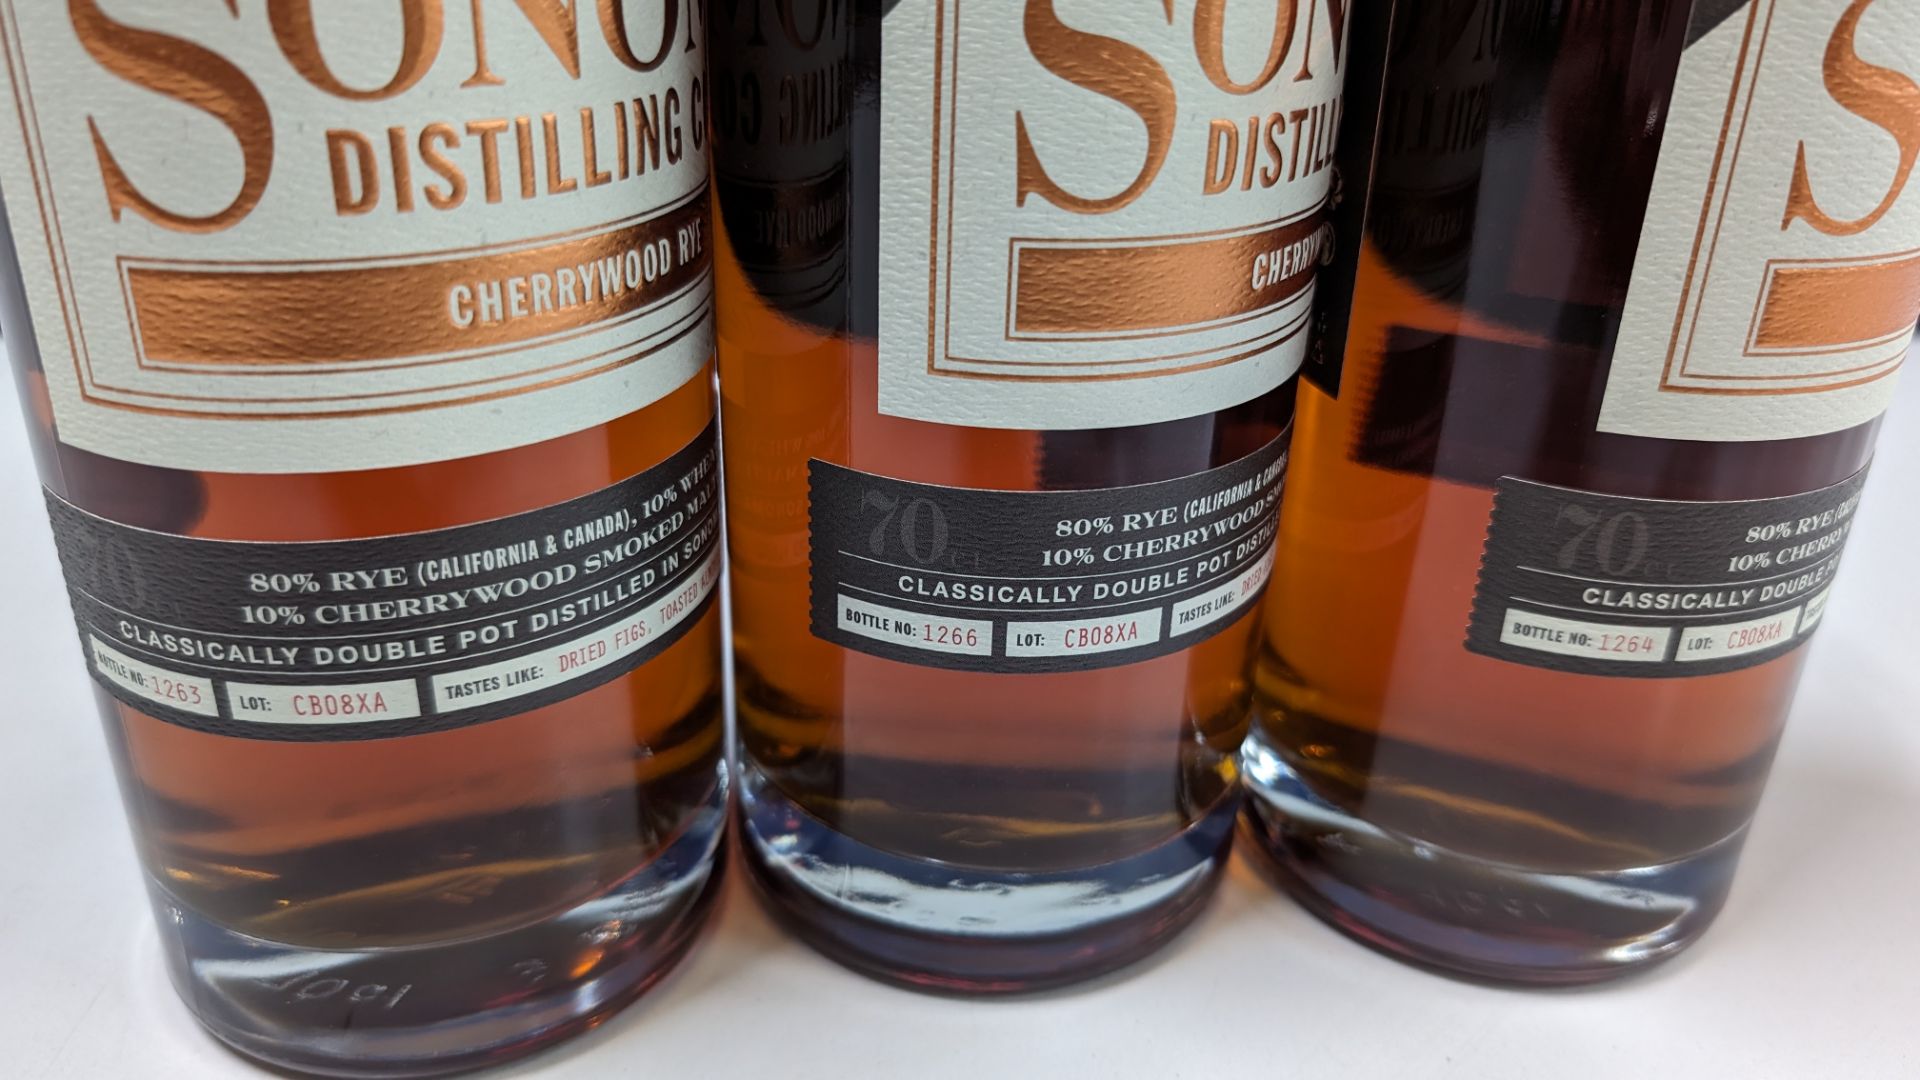 3 off 700ml bottles of Sonoma Cherrywood Rye Whiskey. 47.8% alc/vol (95.6 proof). Distilled and bo - Image 5 of 6